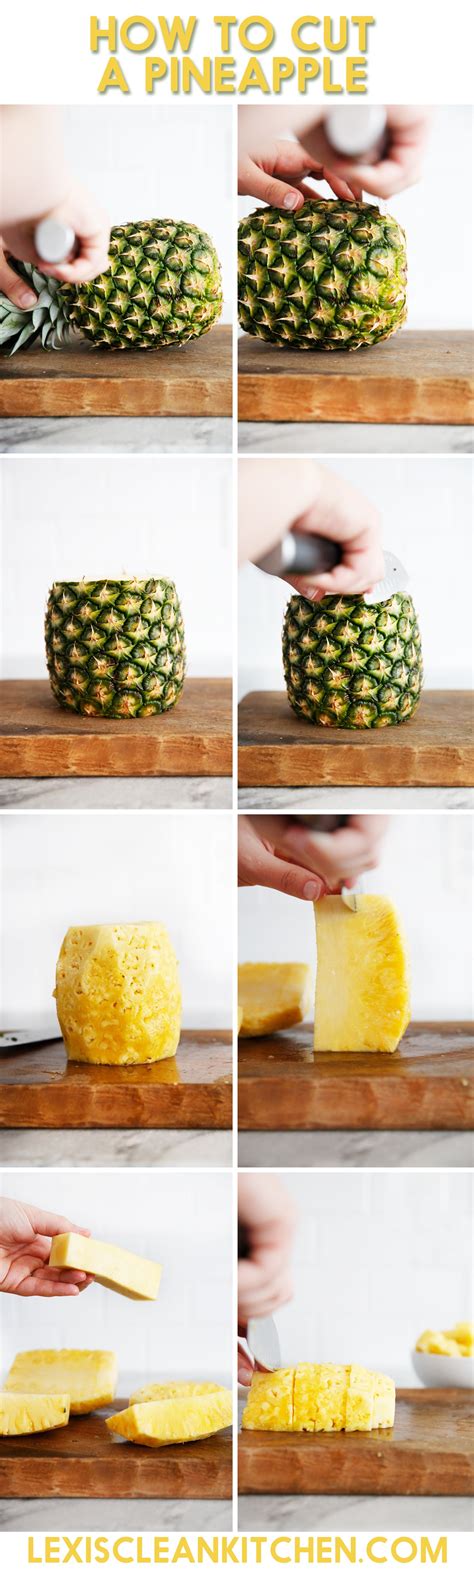 Lexis Clean Kitchen How To Cut And Pick A Pineapple